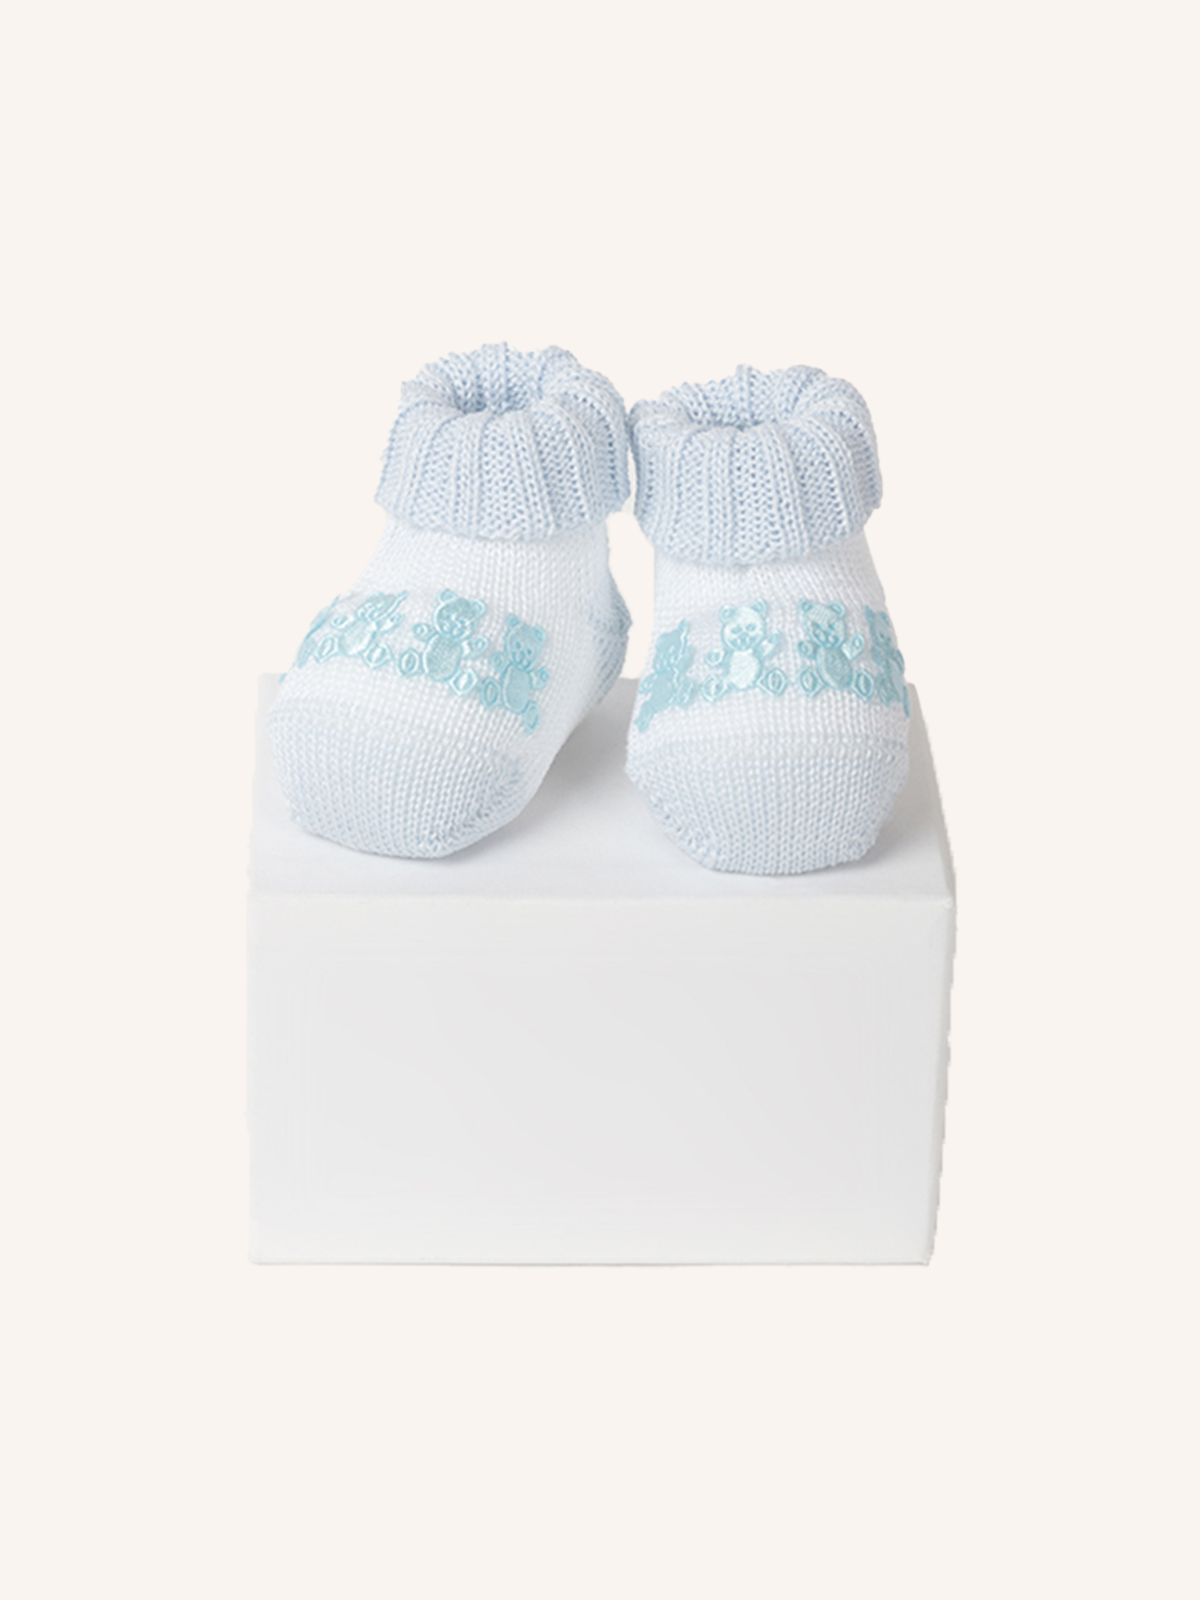 Slipper in Cotton with Teddy Bears for Newborn | Solid Color | Pack of 1 Pair | 42567